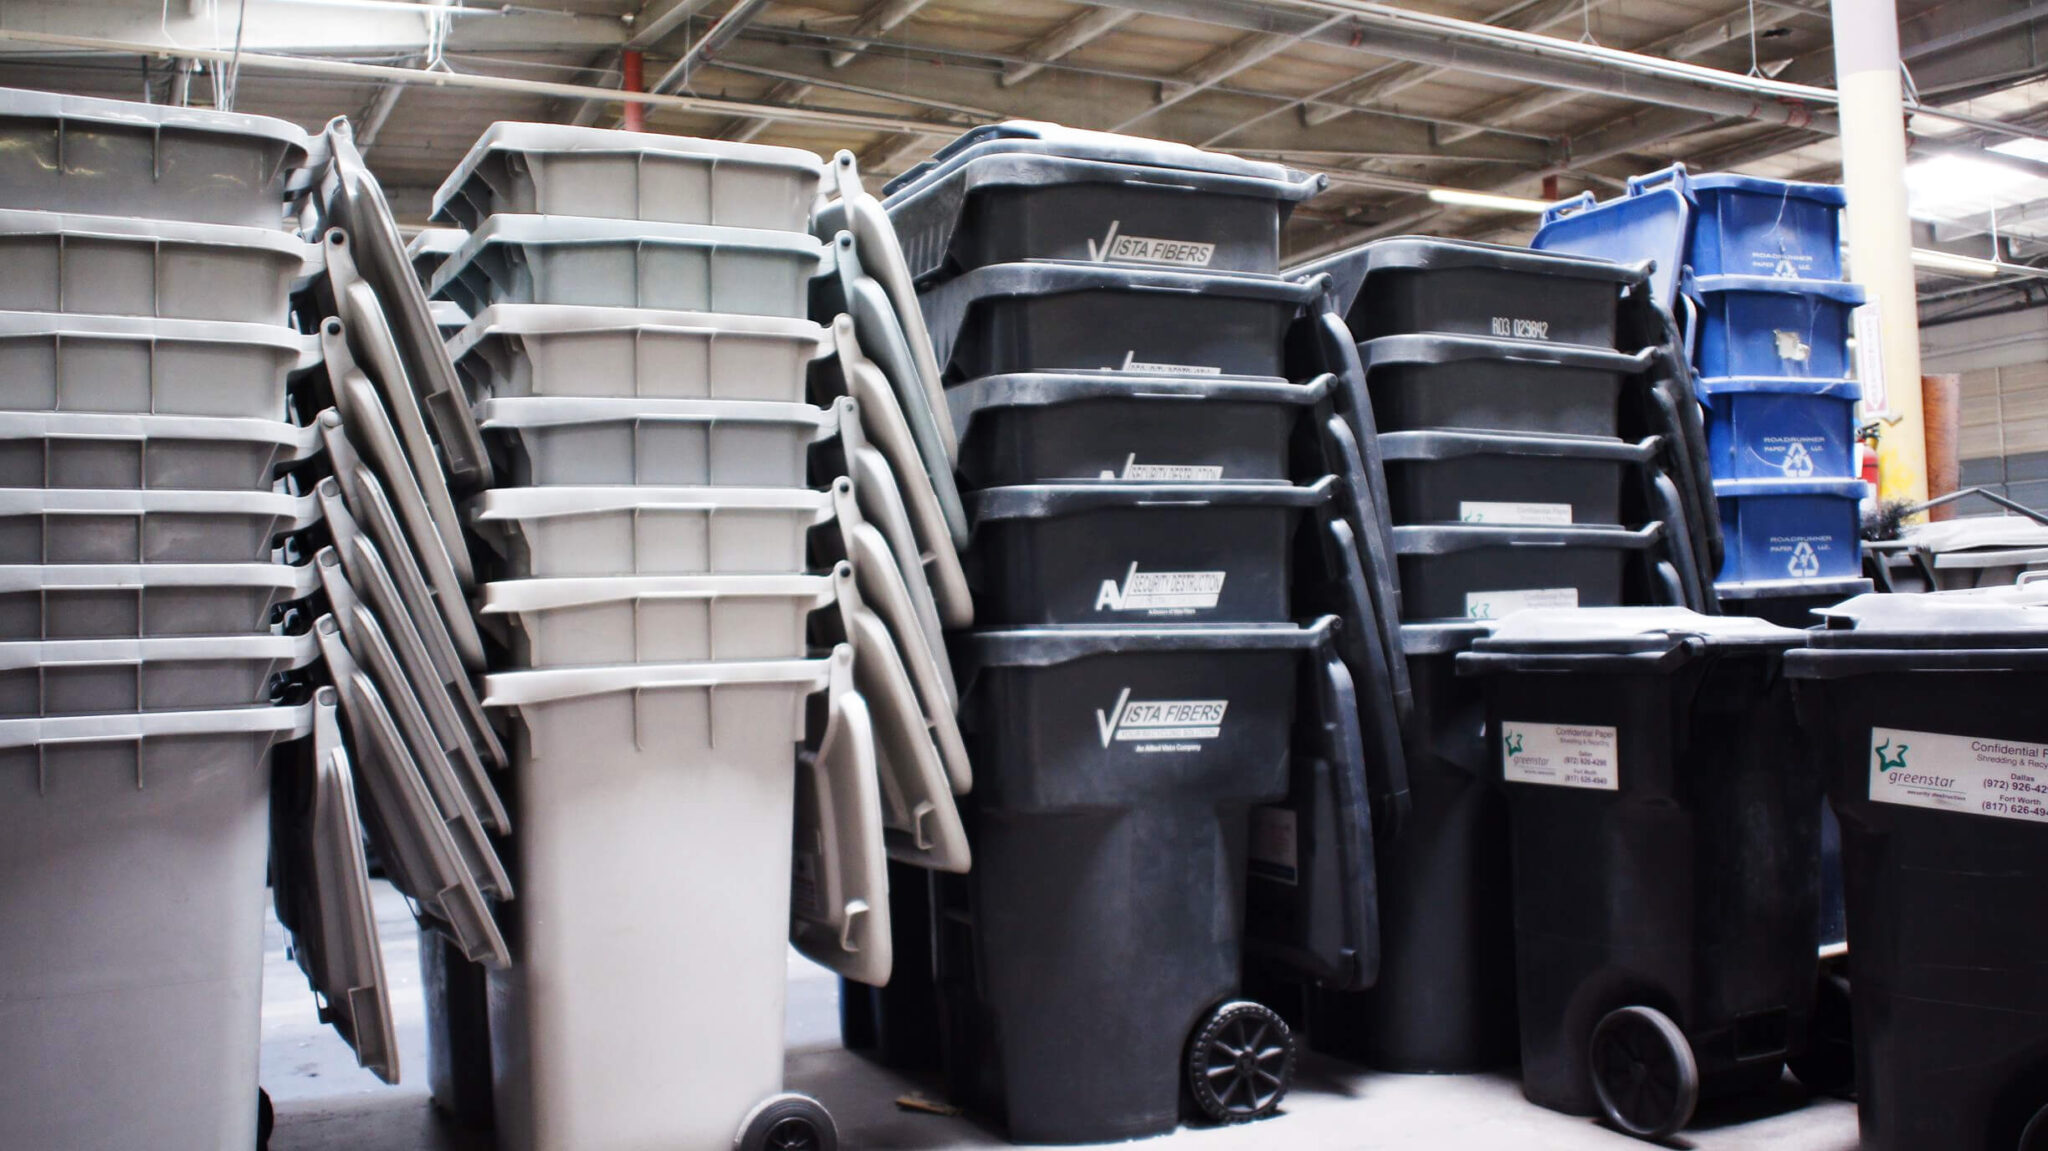 Recycling bins and equipment